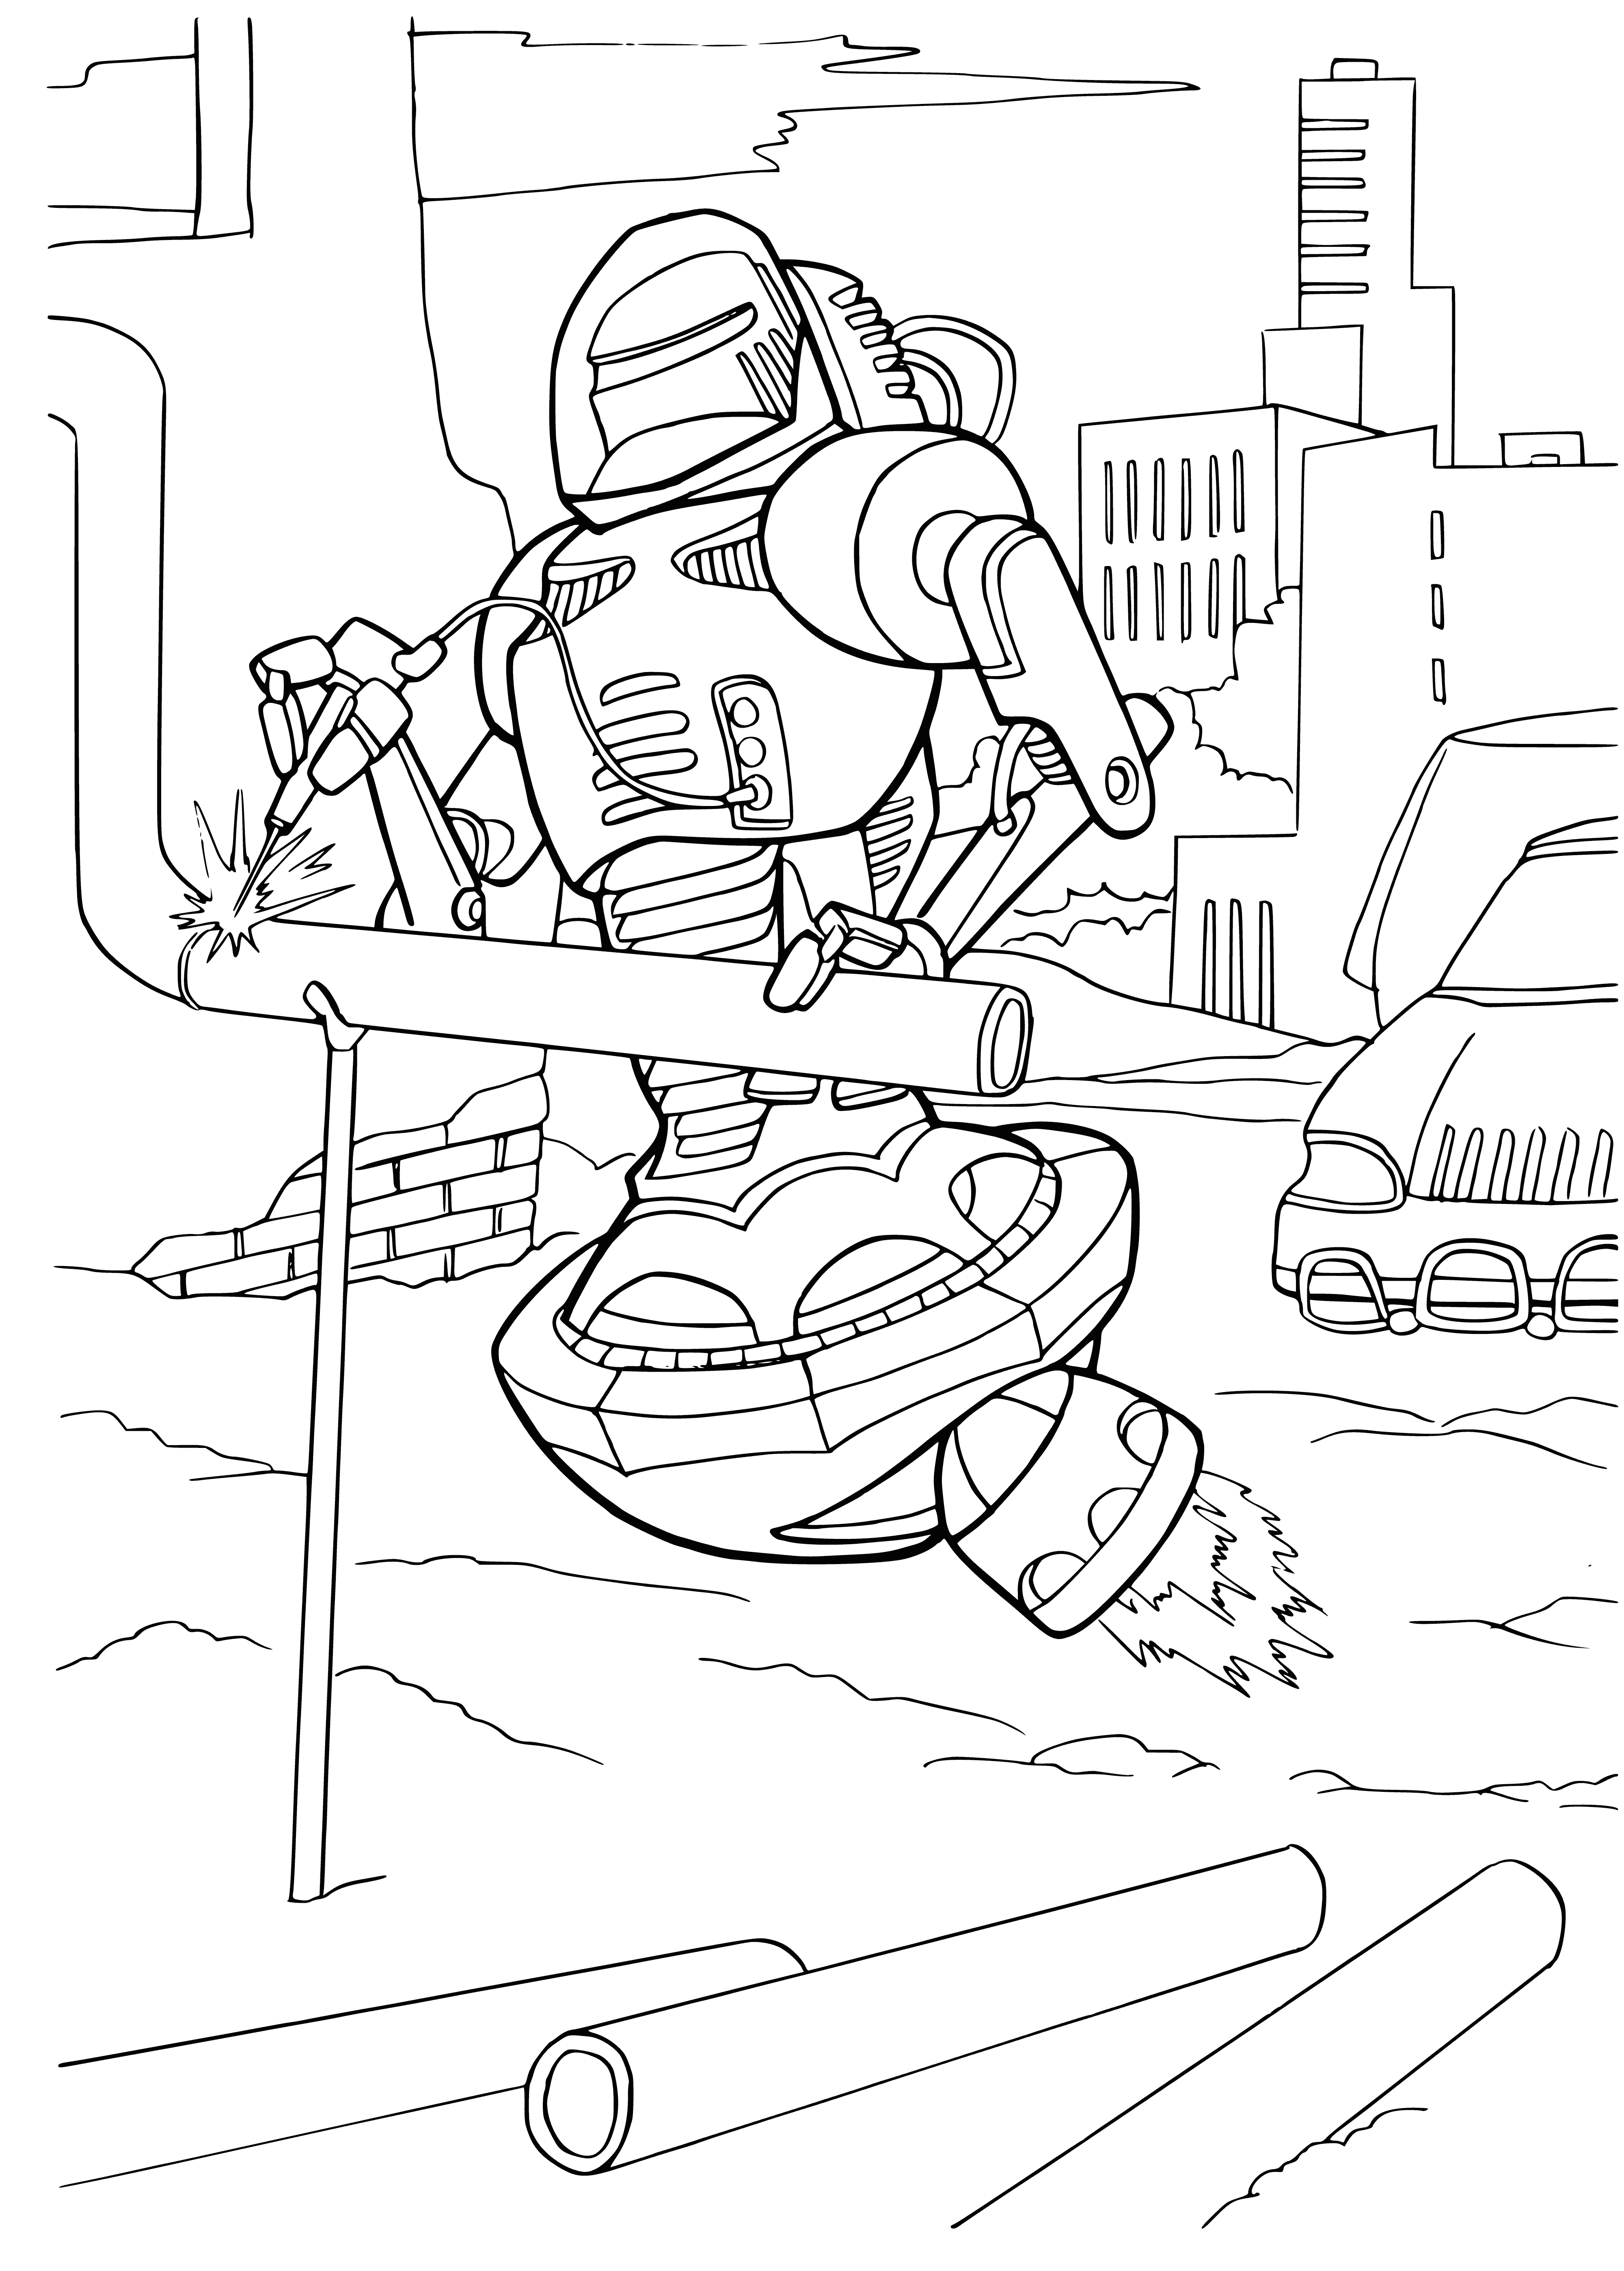 Robot welder coloring page